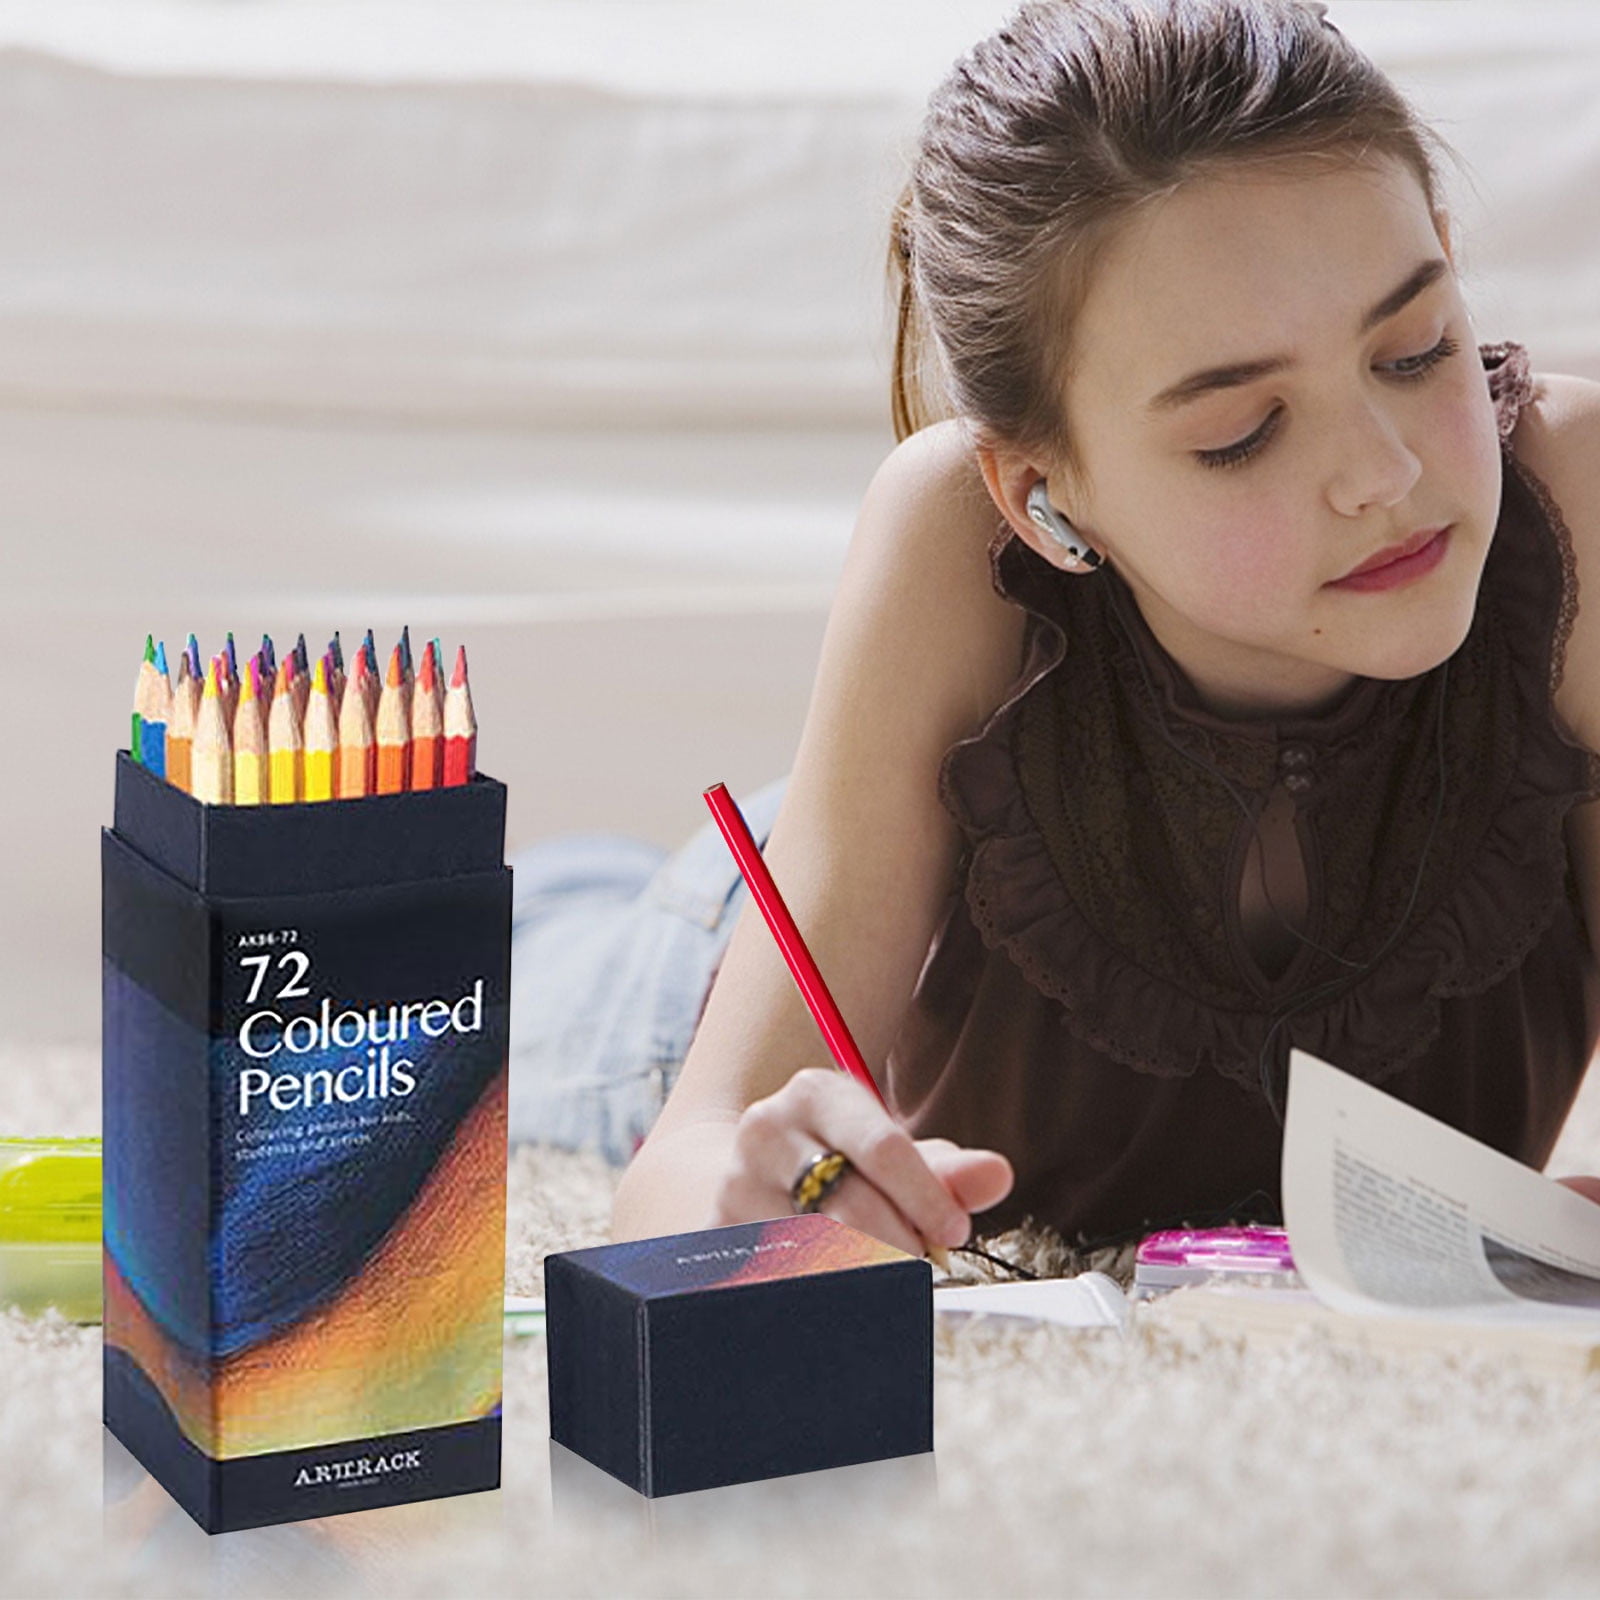 PENGXIANG 72 Colored Pencils Set,Quality Soft Core Colored Leads for Adult  Artists, Professionals and Colorists 